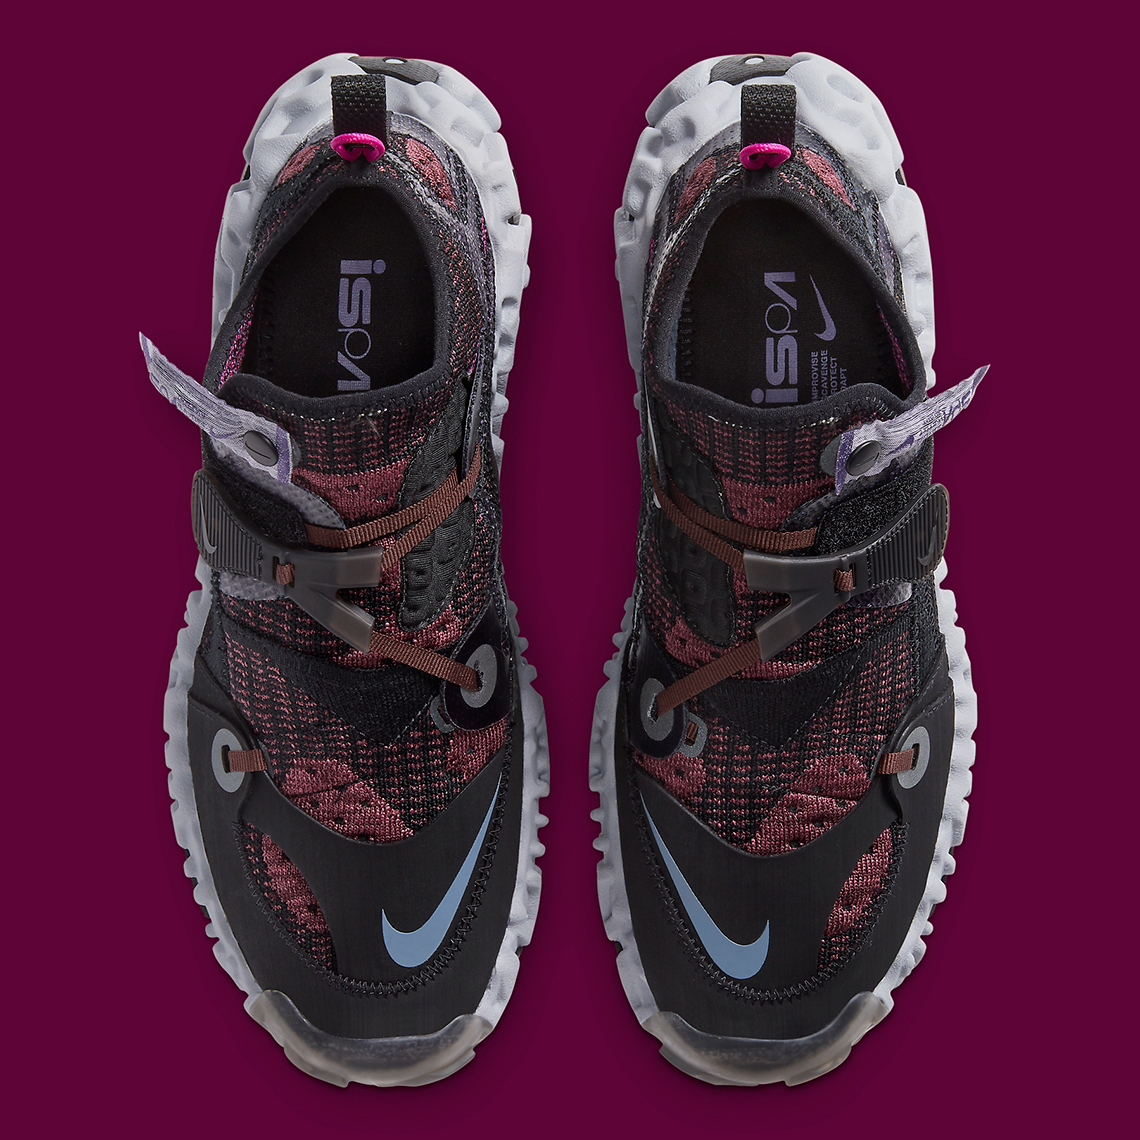 Nike ISPA OverReact Shadowberry CD9664-002 Release Date | SneakerNews.com